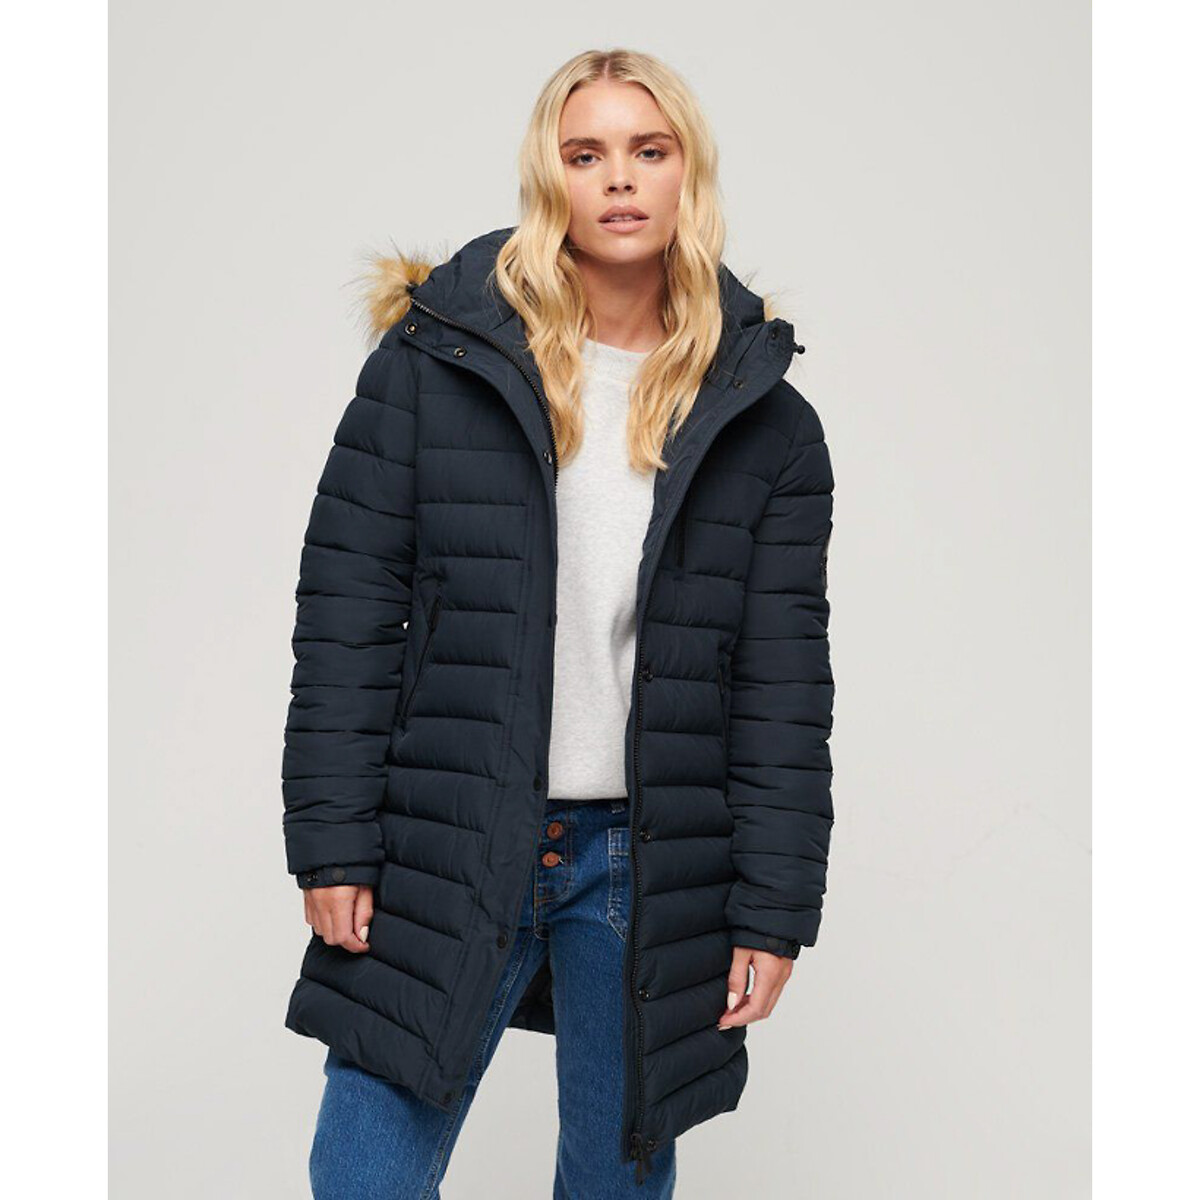 Fuji mid-length padded jacket with faux fur trim hood Superdry | La Redoute